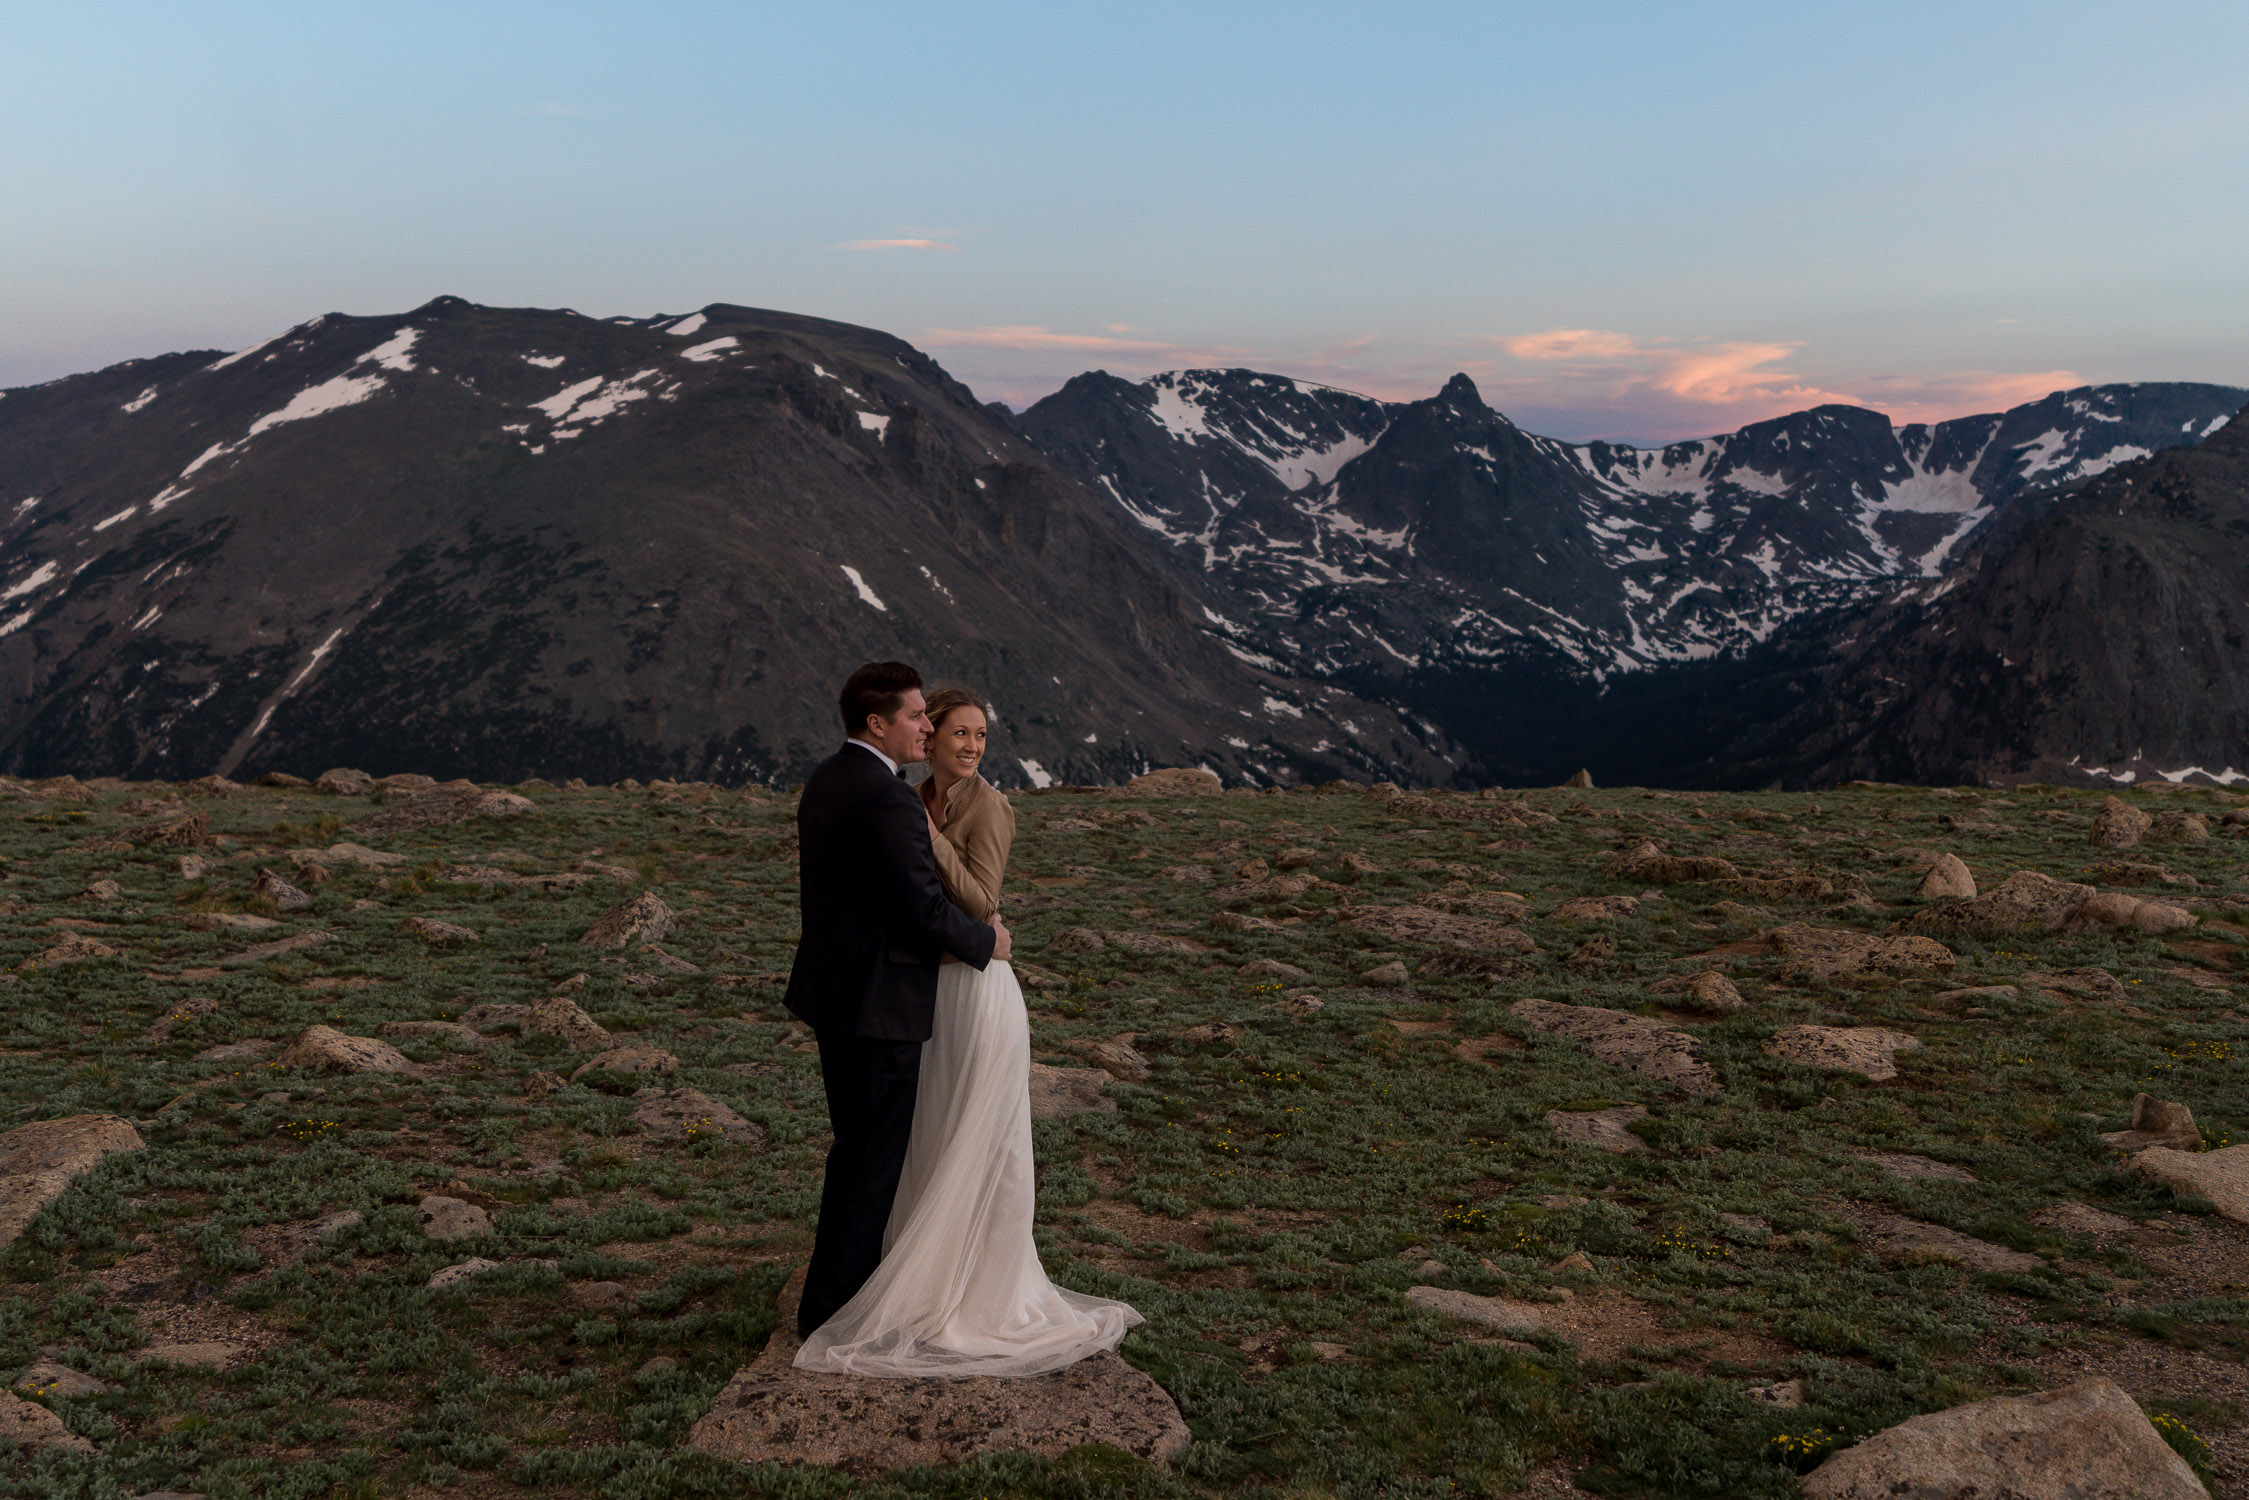 rocky mountain national park adventure wedding sunset session with mountain views